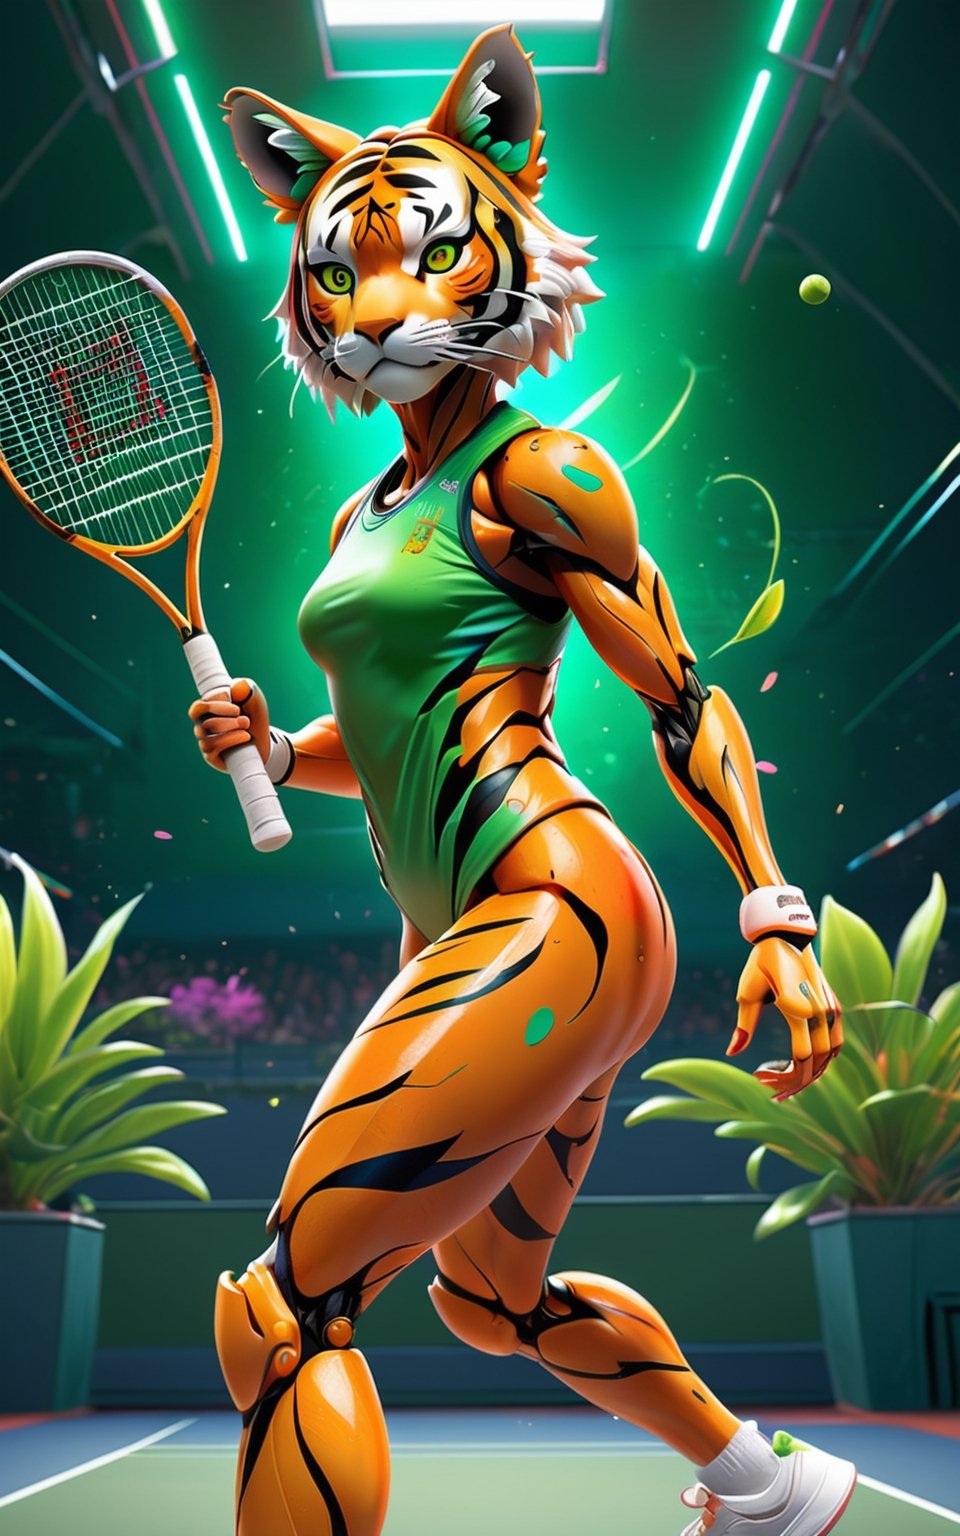 (fullbody:1) of Tiger tennis player in tennis court, (masterpiece:1.1), (highest quality:1.1), (HDR:1.0), extreme quality, cg, (negative space), detailed face+eyes, 1girl, fox ears, (plants:1.18), (fractal art), (bright colors), splashes of color background, colors mashing, paint splatter, complimentary colors, neon, compassionate, electric, limited palette, synthwave, fine art, tan skin, full body, (green and orange:1.2), time stop, sy3, SMM,photo r3al,mecha,DonMCyb3rN3cr0XL 